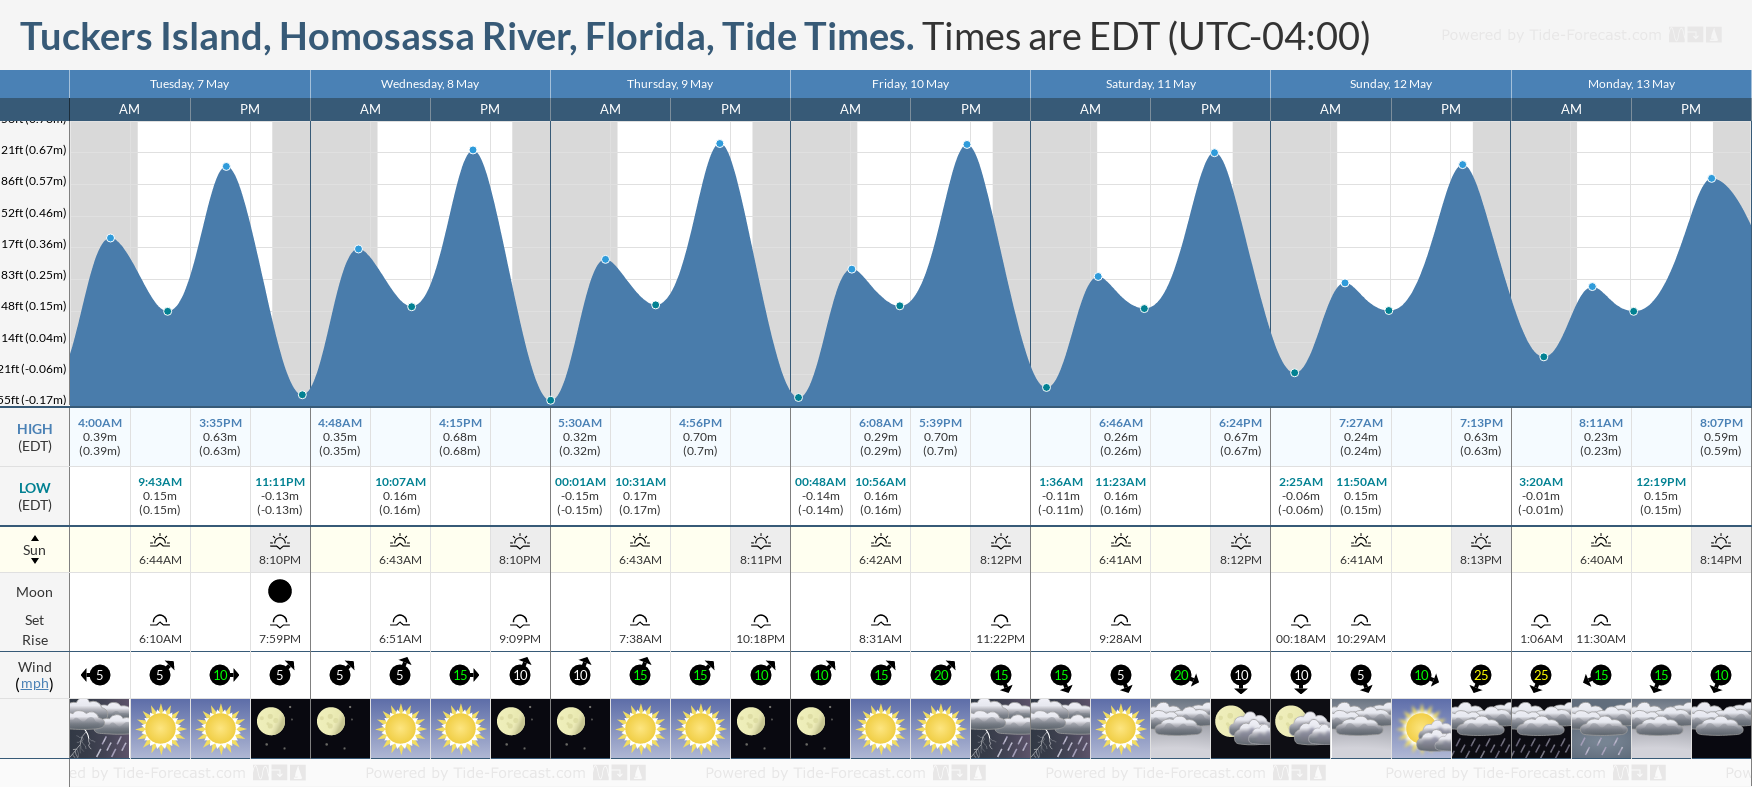 Tuckers Island, Homosassa River, Florida Tide Chart including high and low tide tide times for the next 7 days